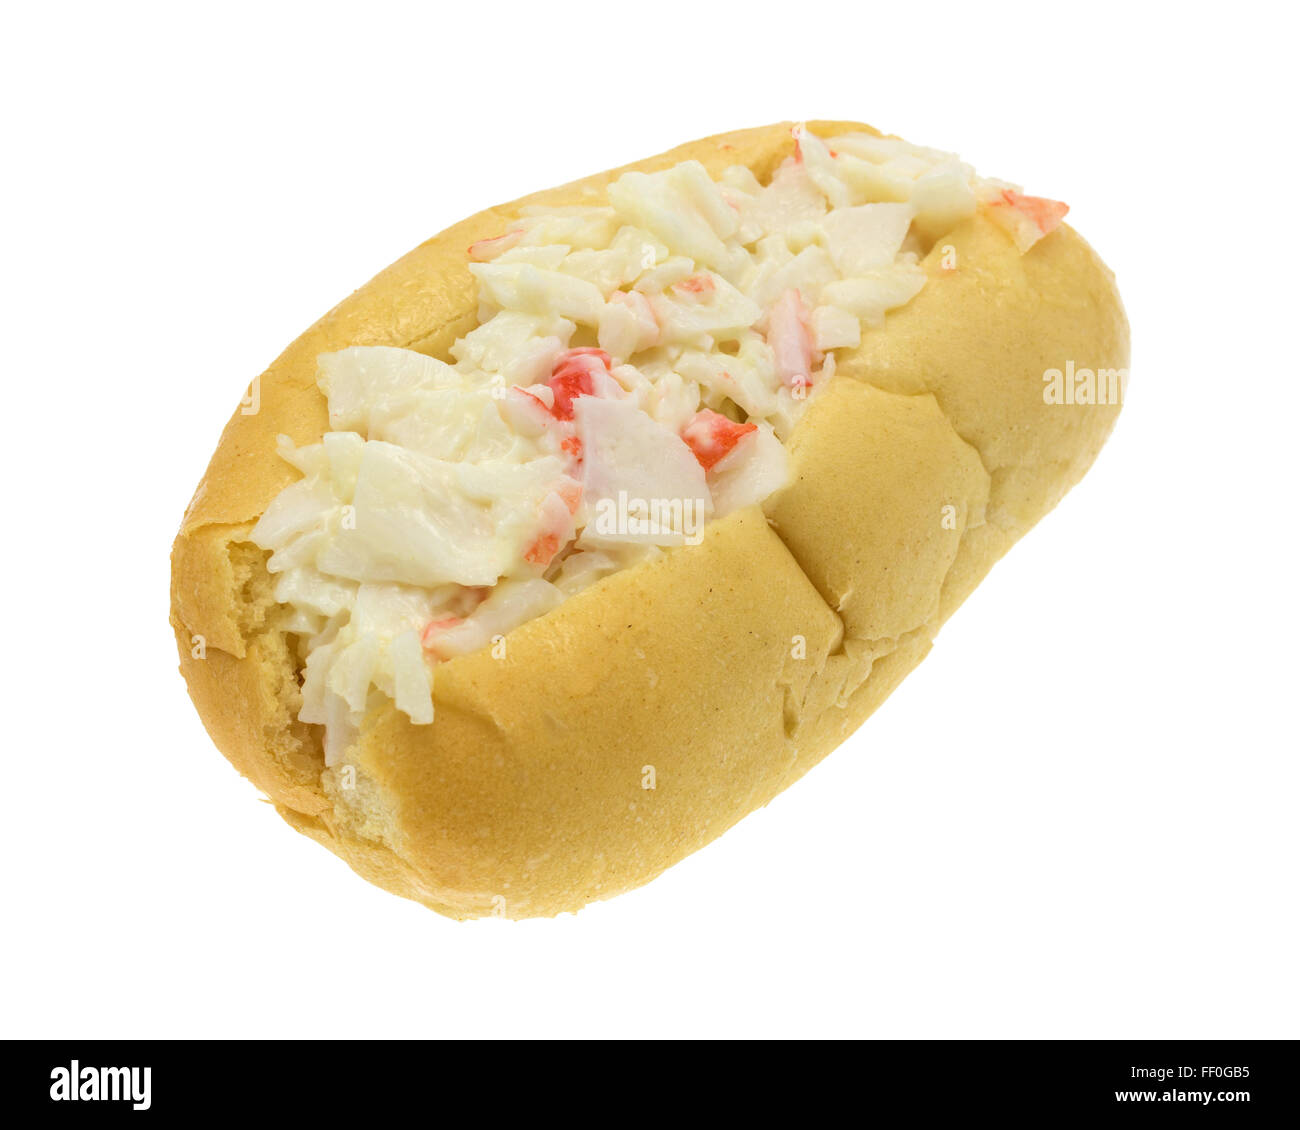 A surimi crab meat made into a salad with mayonnaise on a small sub roll isolated on a white background. Stock Photo